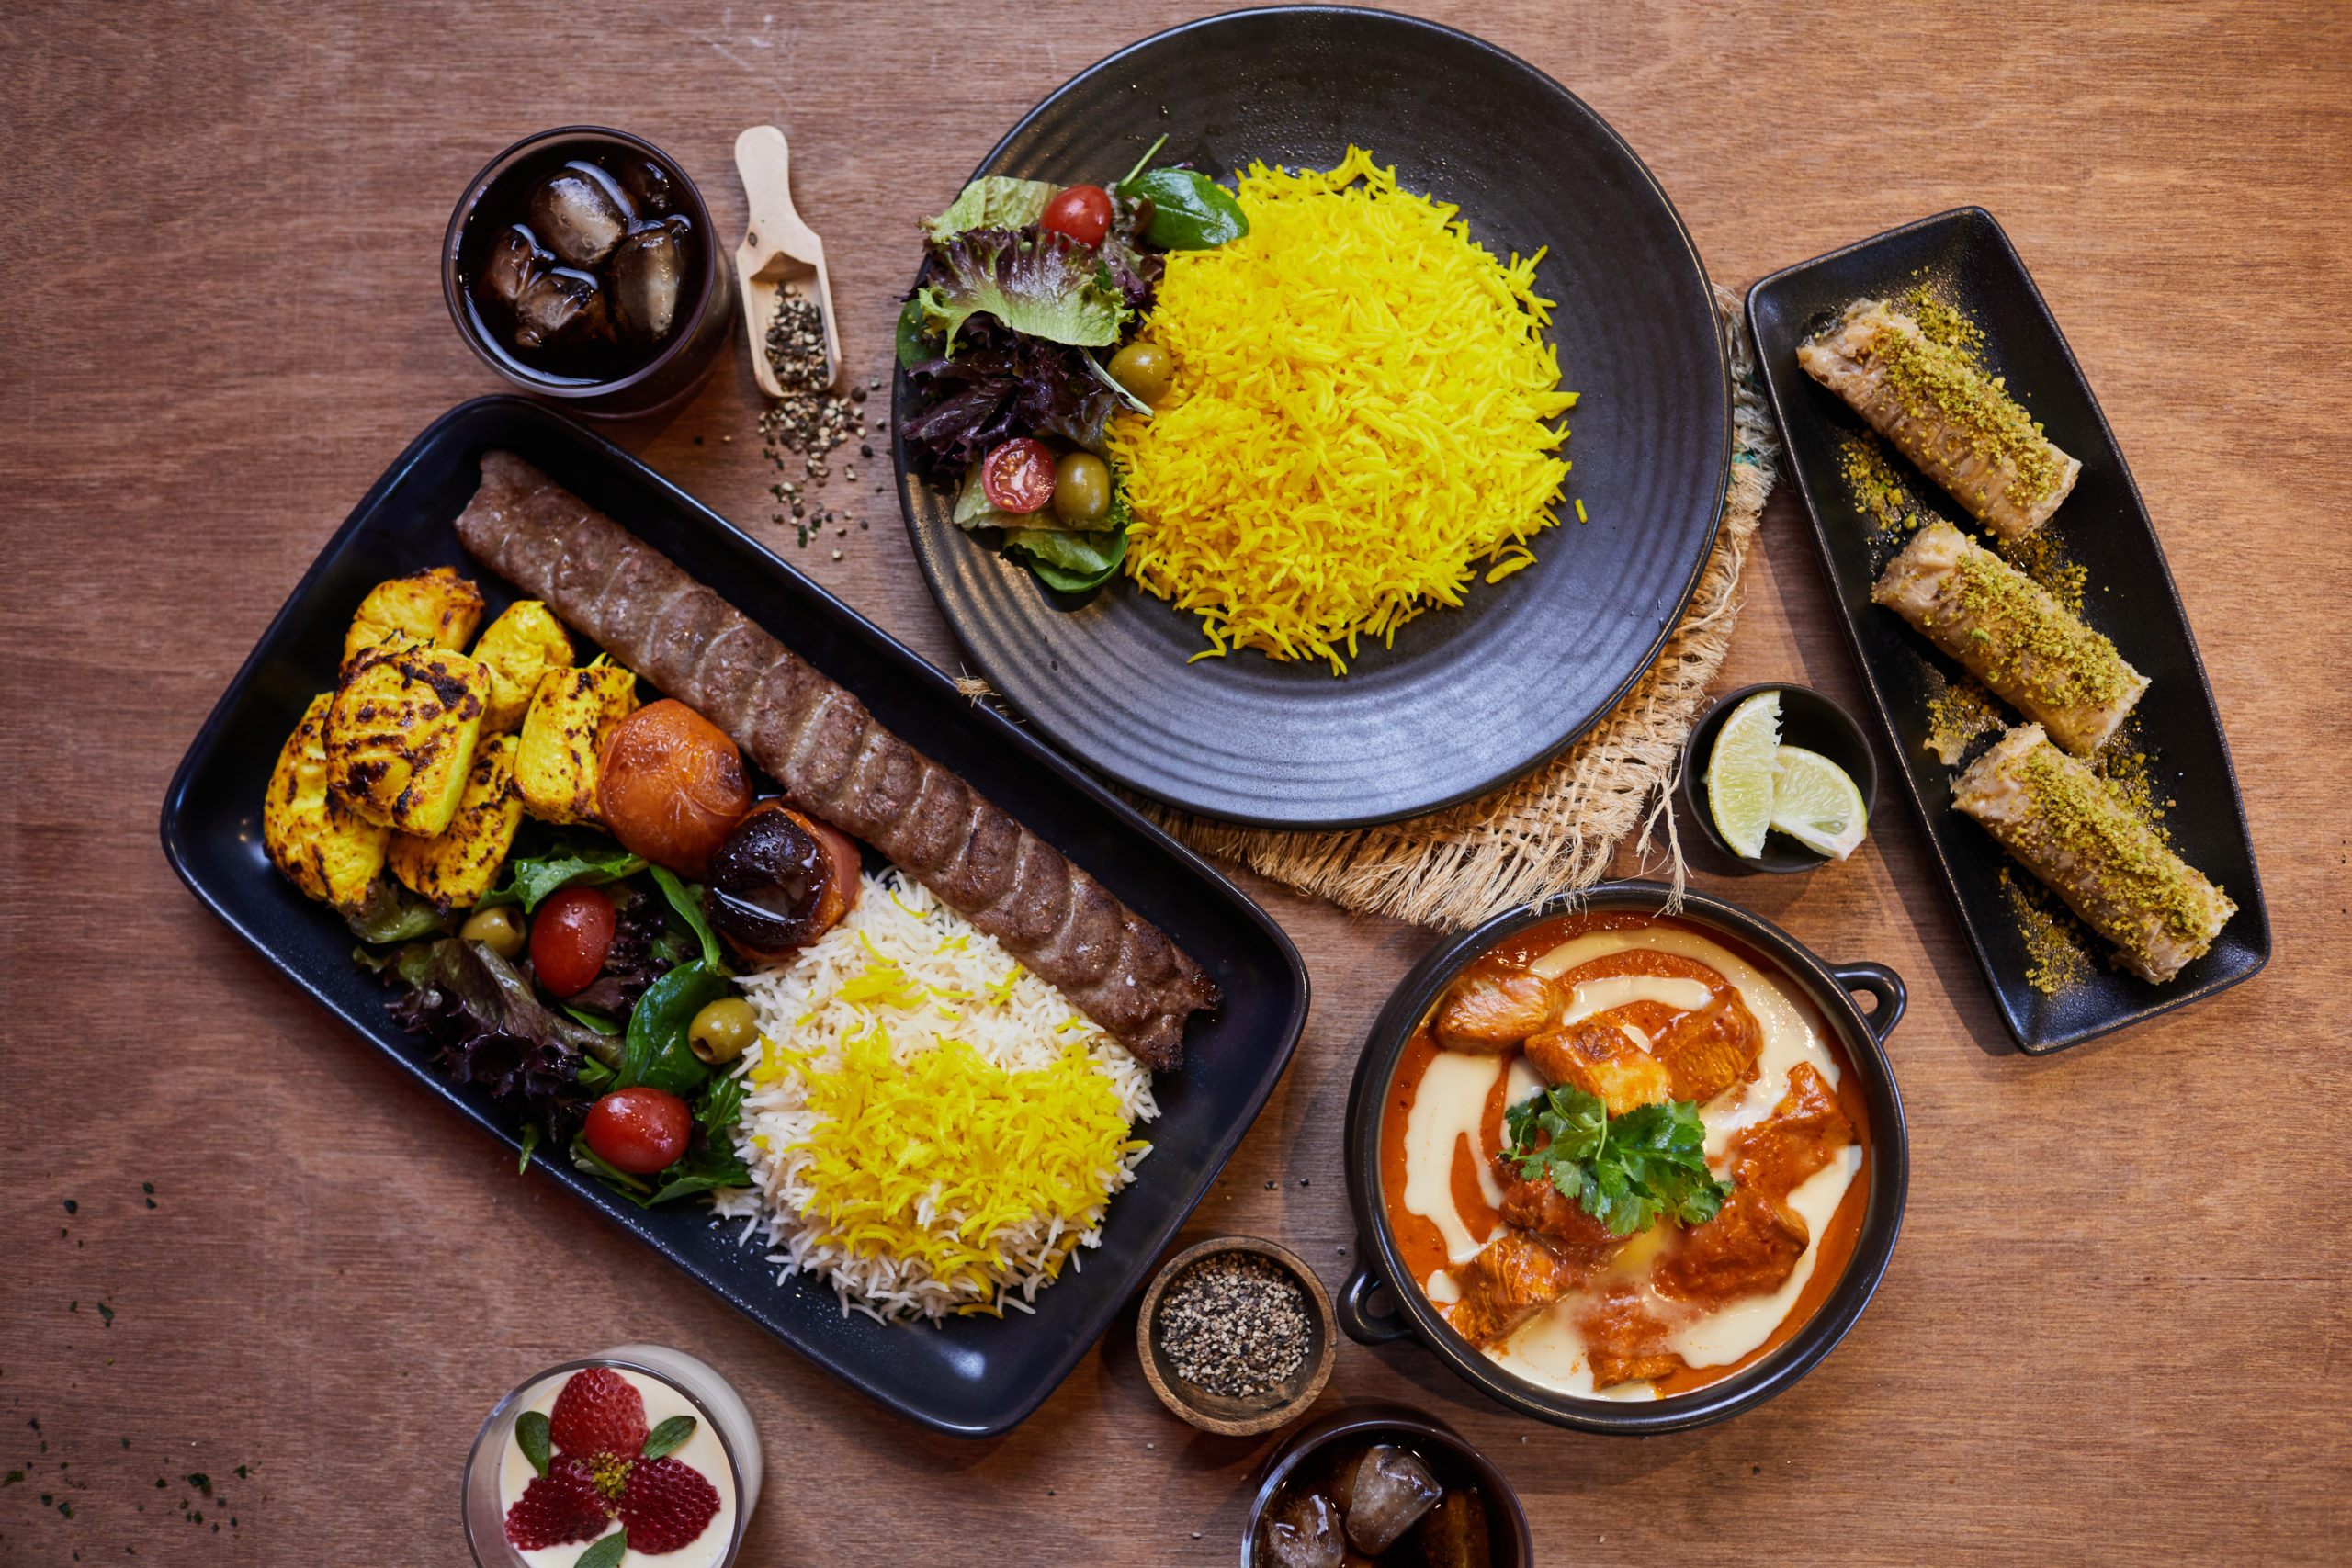 Indian and Persian Cuisines